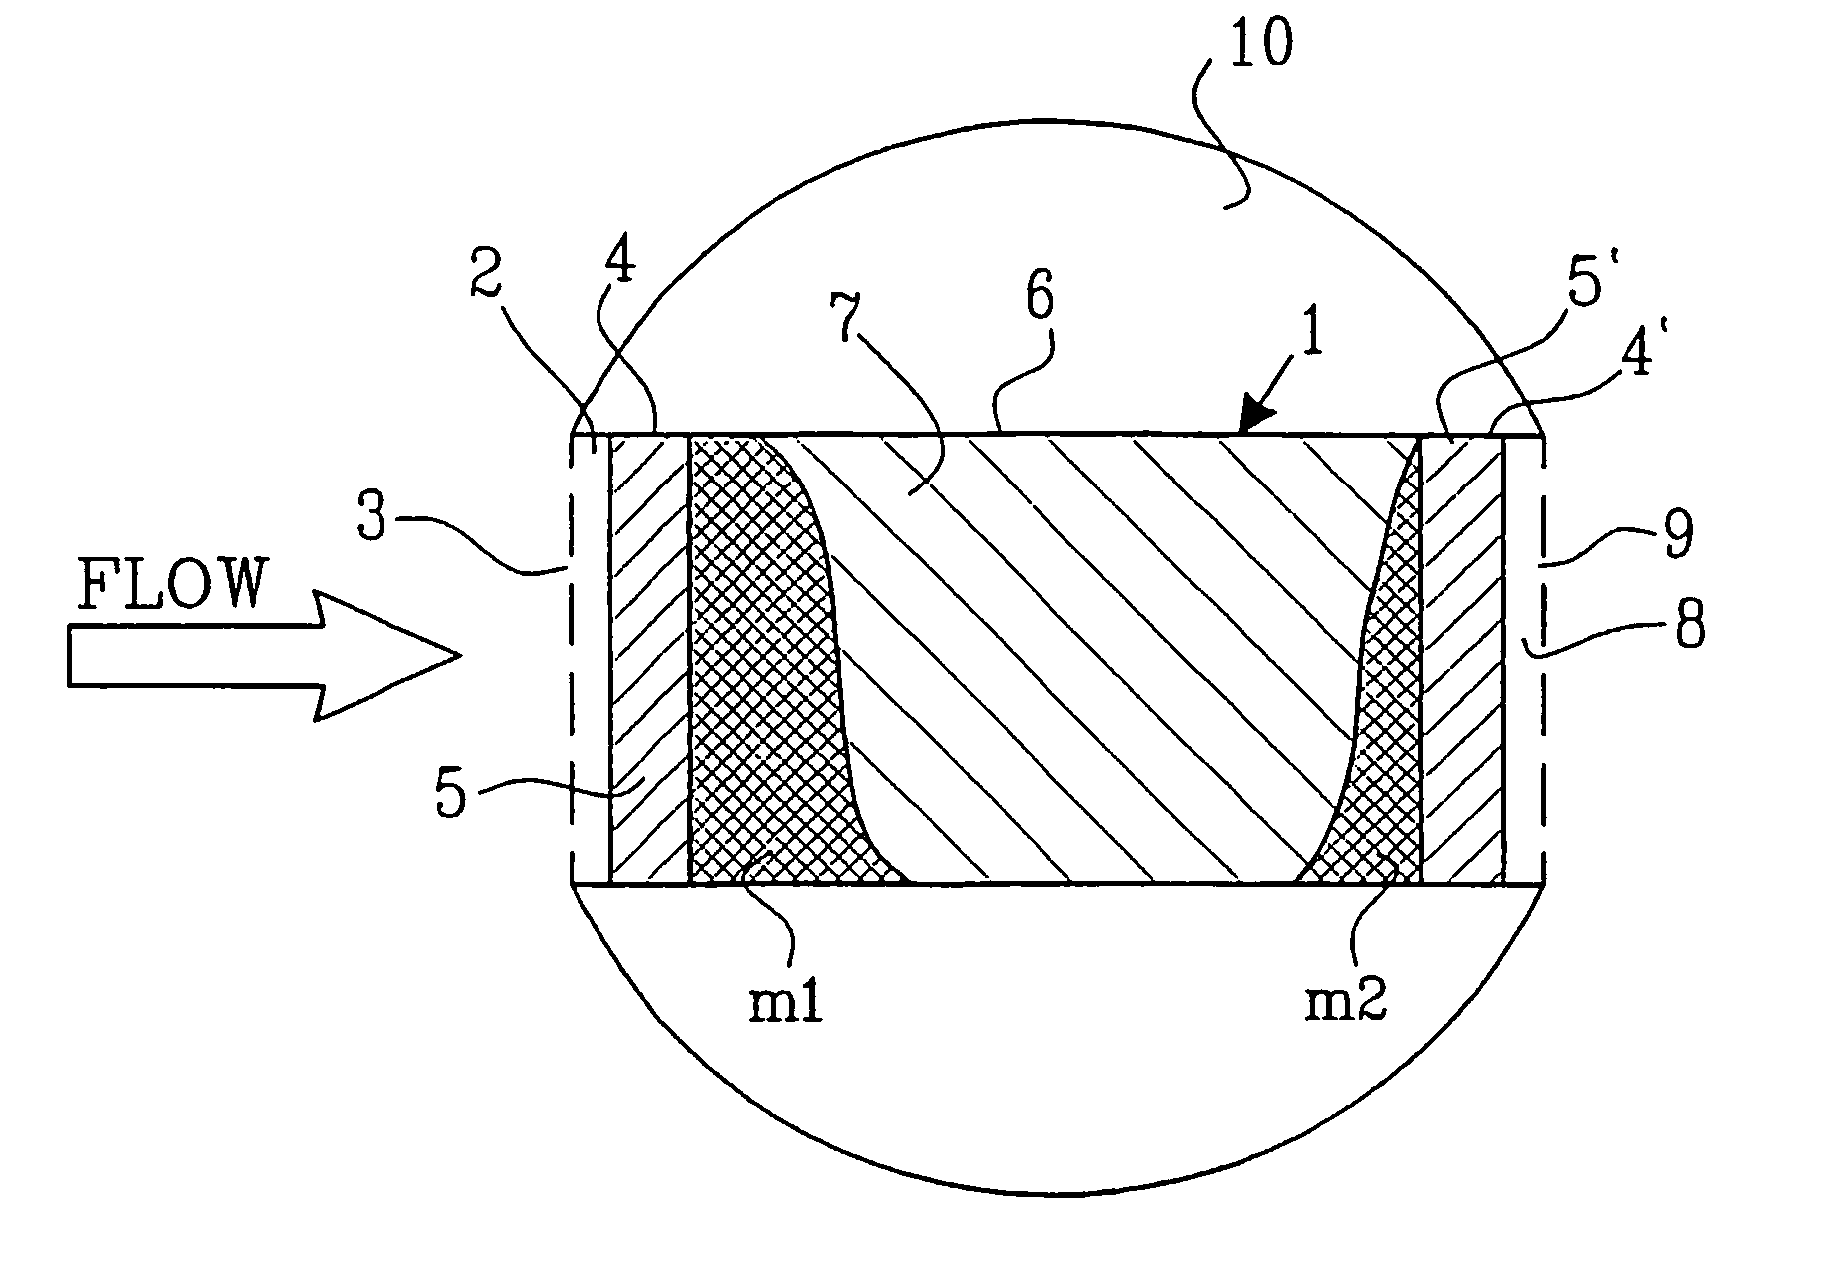 Sampling device and method for measuring fluid flow and solute mass transport